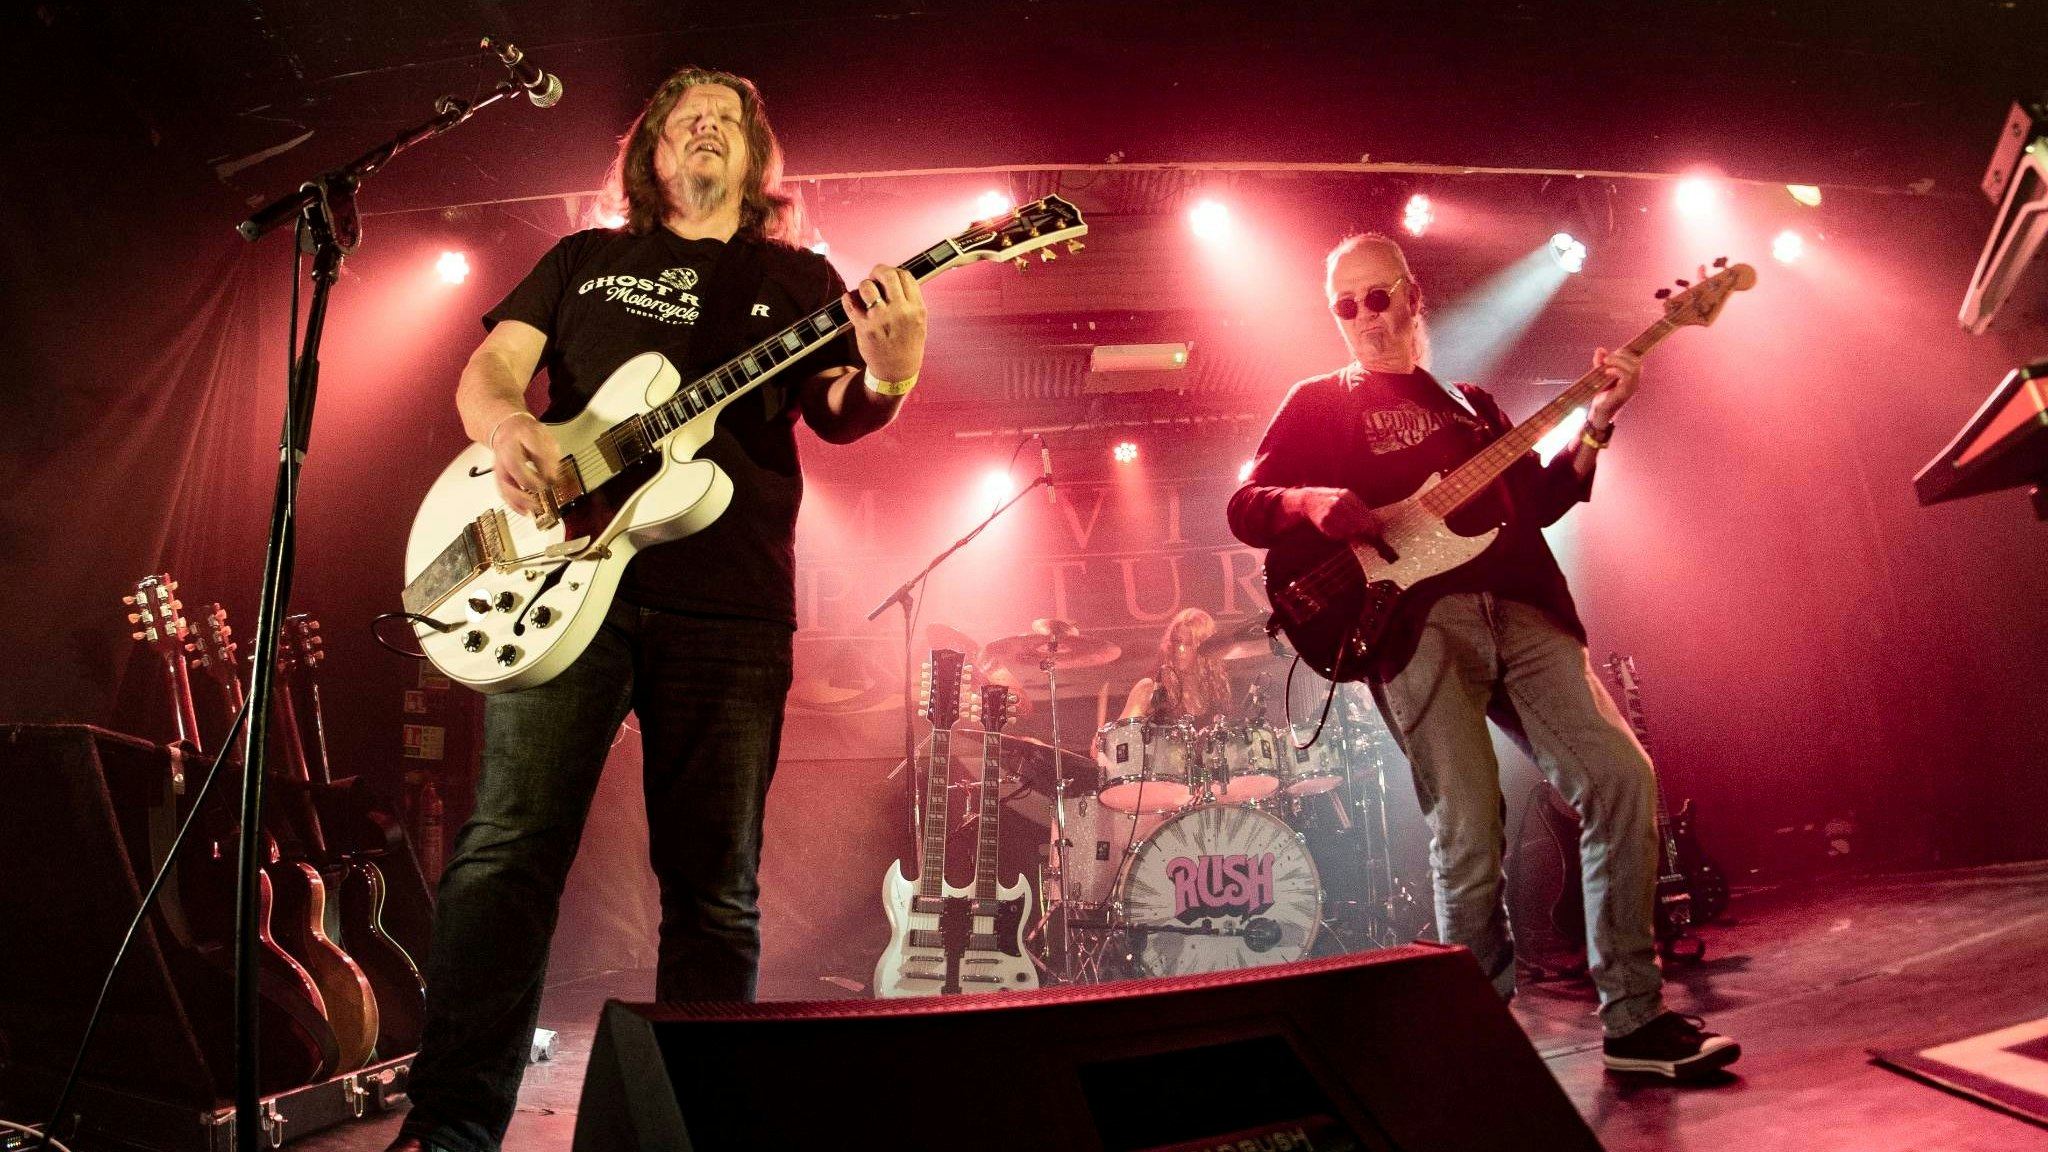 Moving Pictures – A Tribute to the Music of Rush